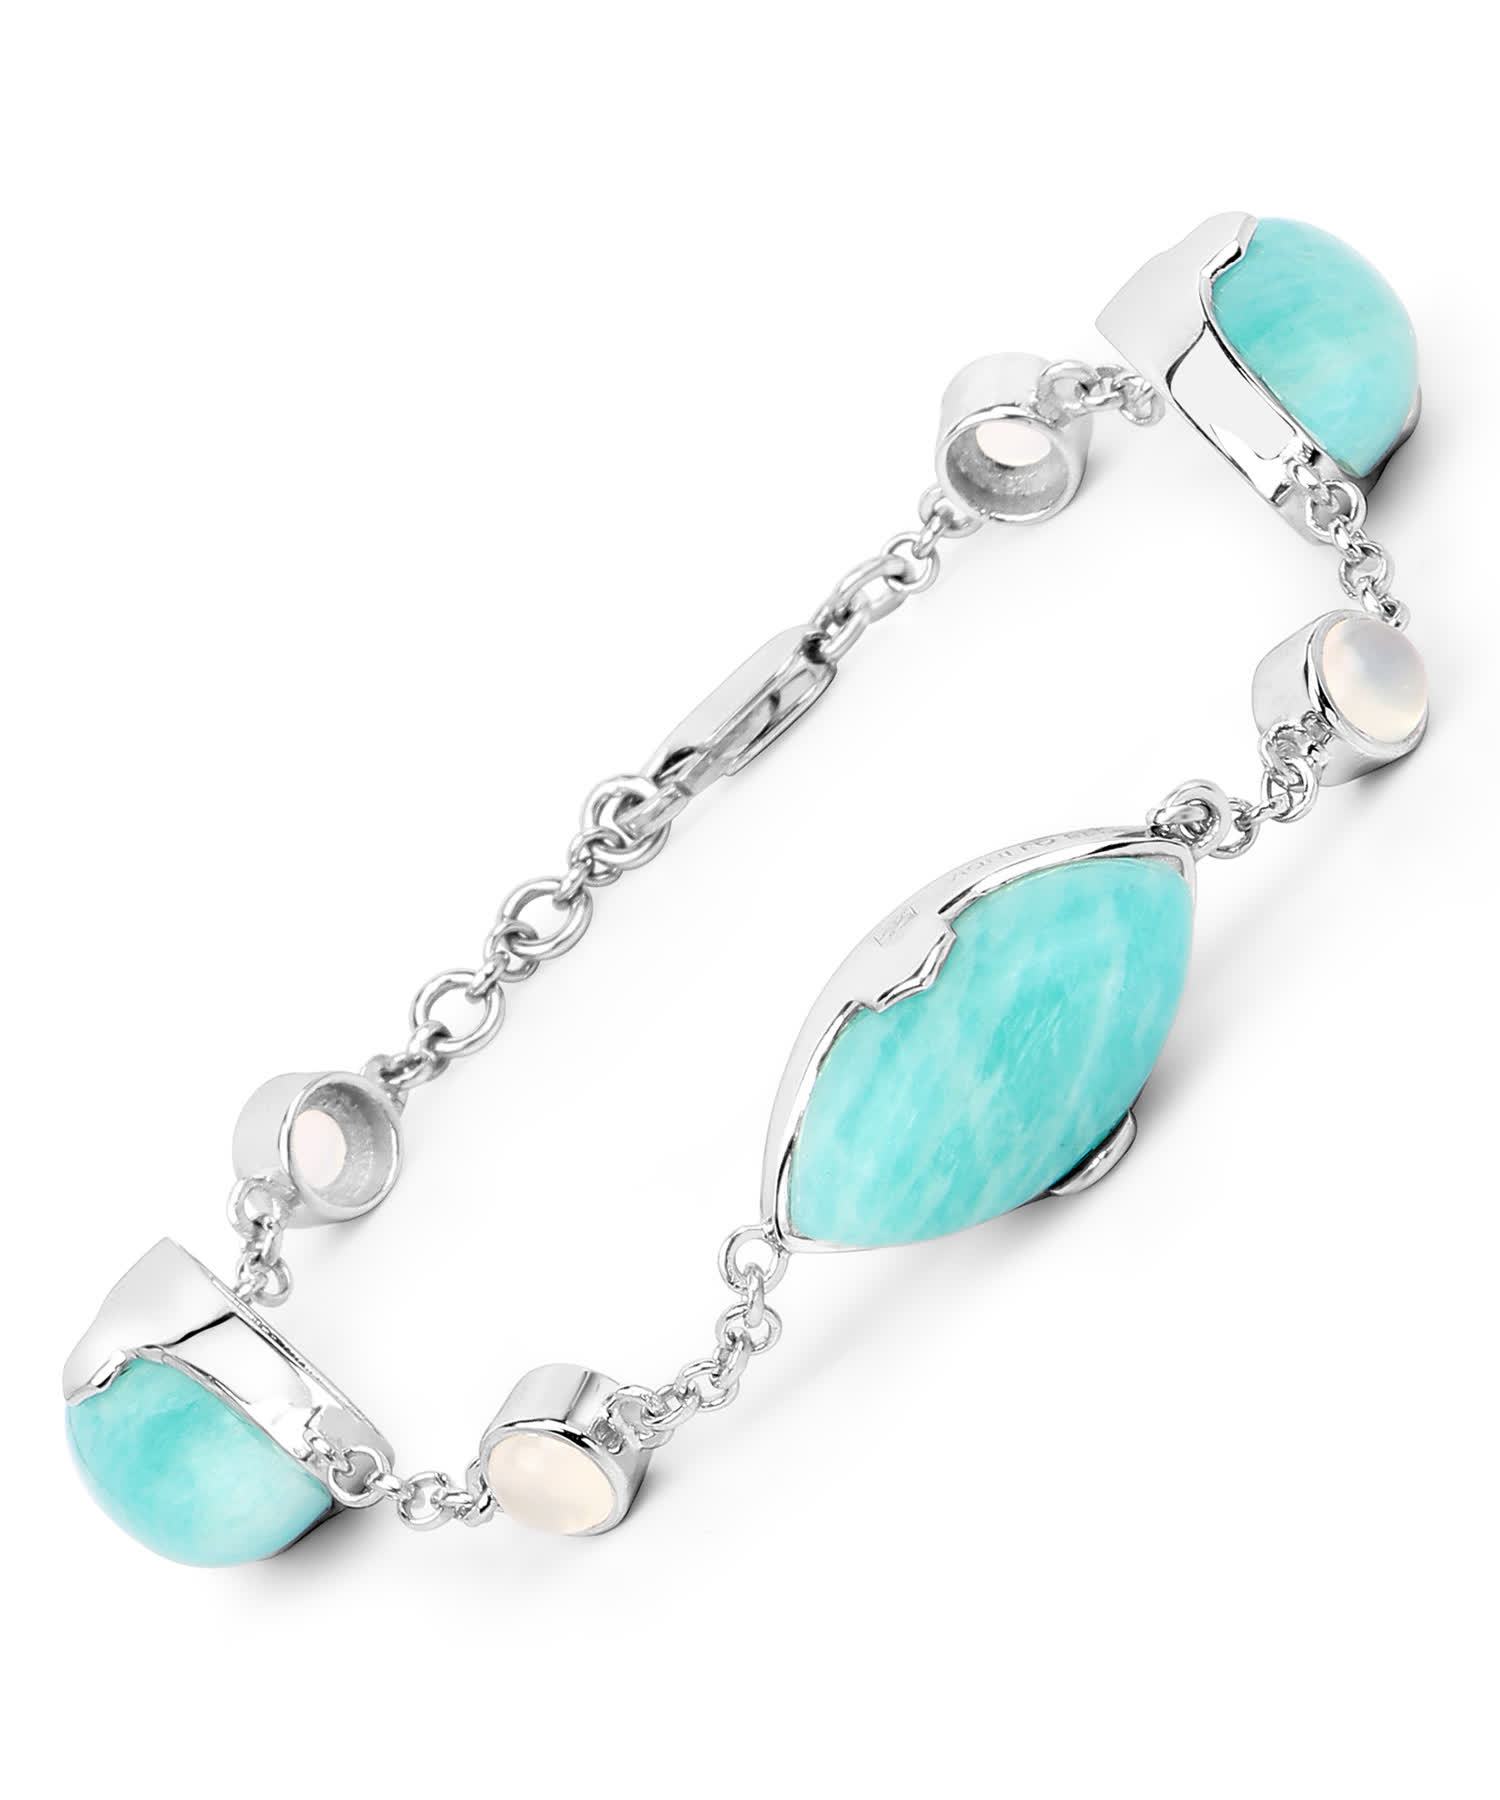 29.70ctw Natural Amazonite and Agate Rhodium Plated 925 Sterling Silver Link Bracelet View 1